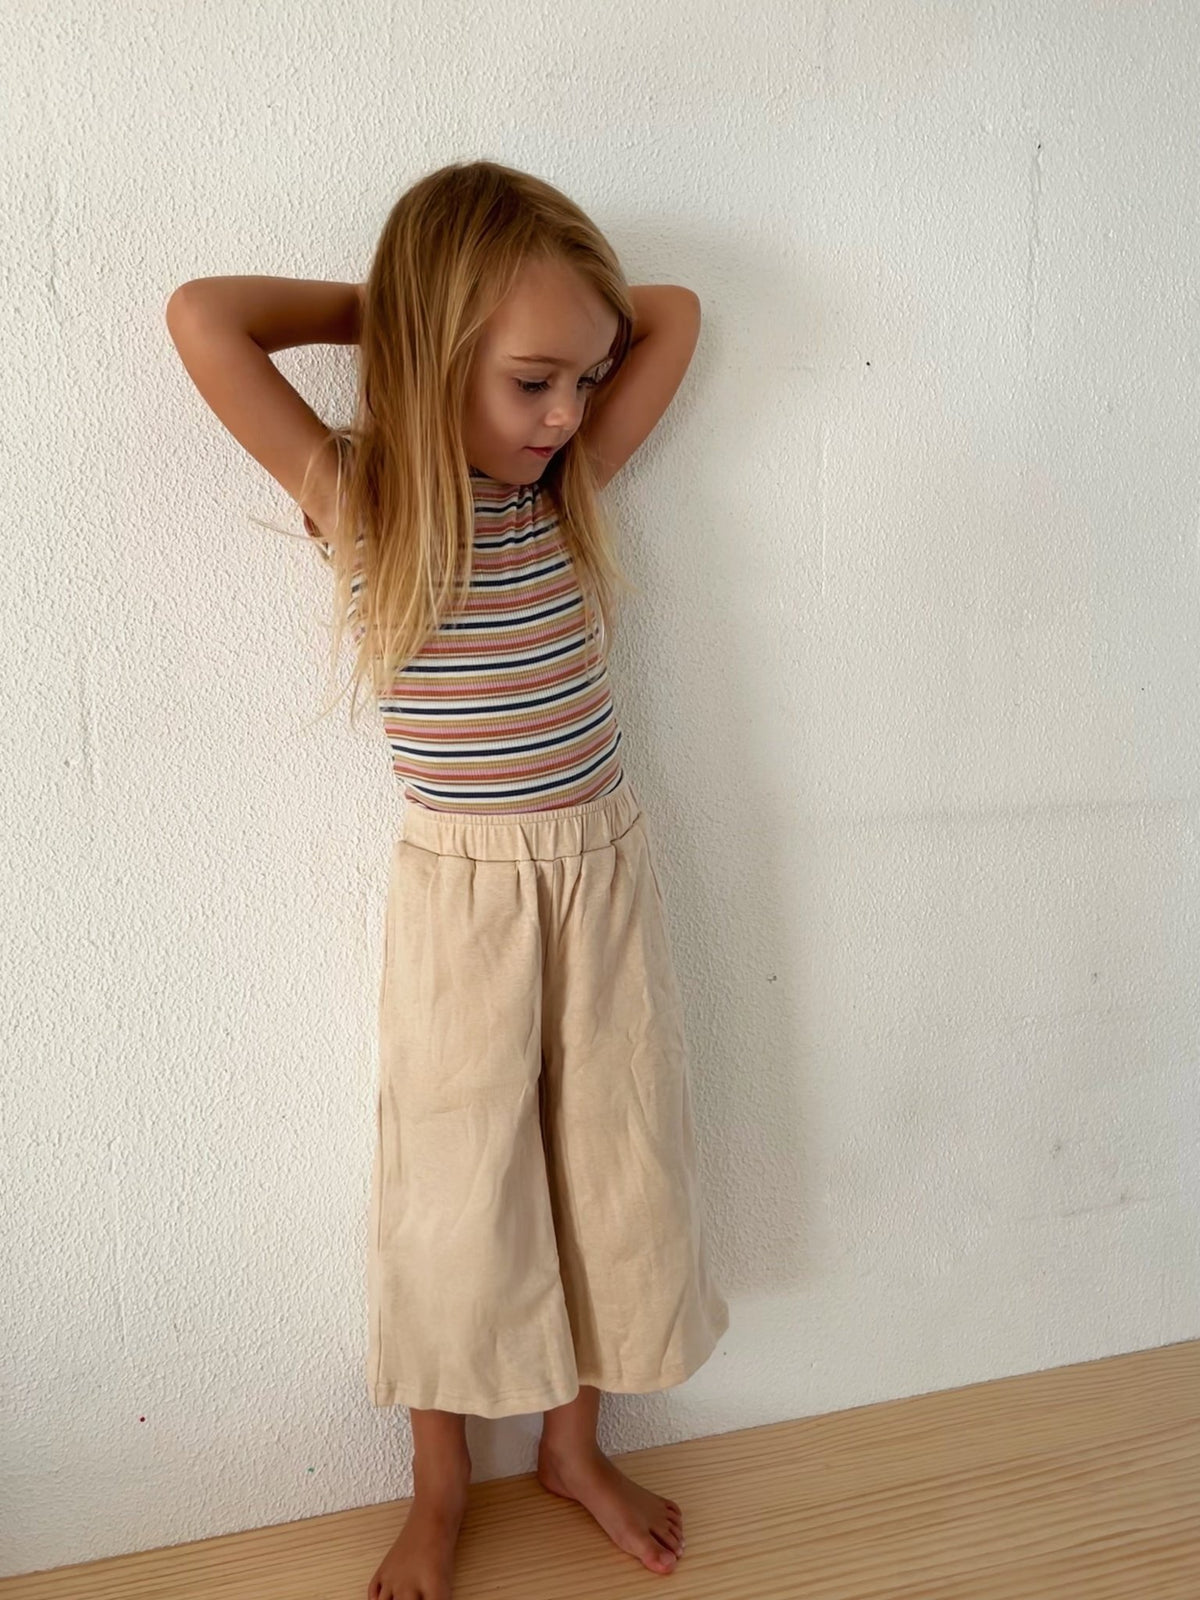 Undyed cotton lounge pants - Marlow and Mae